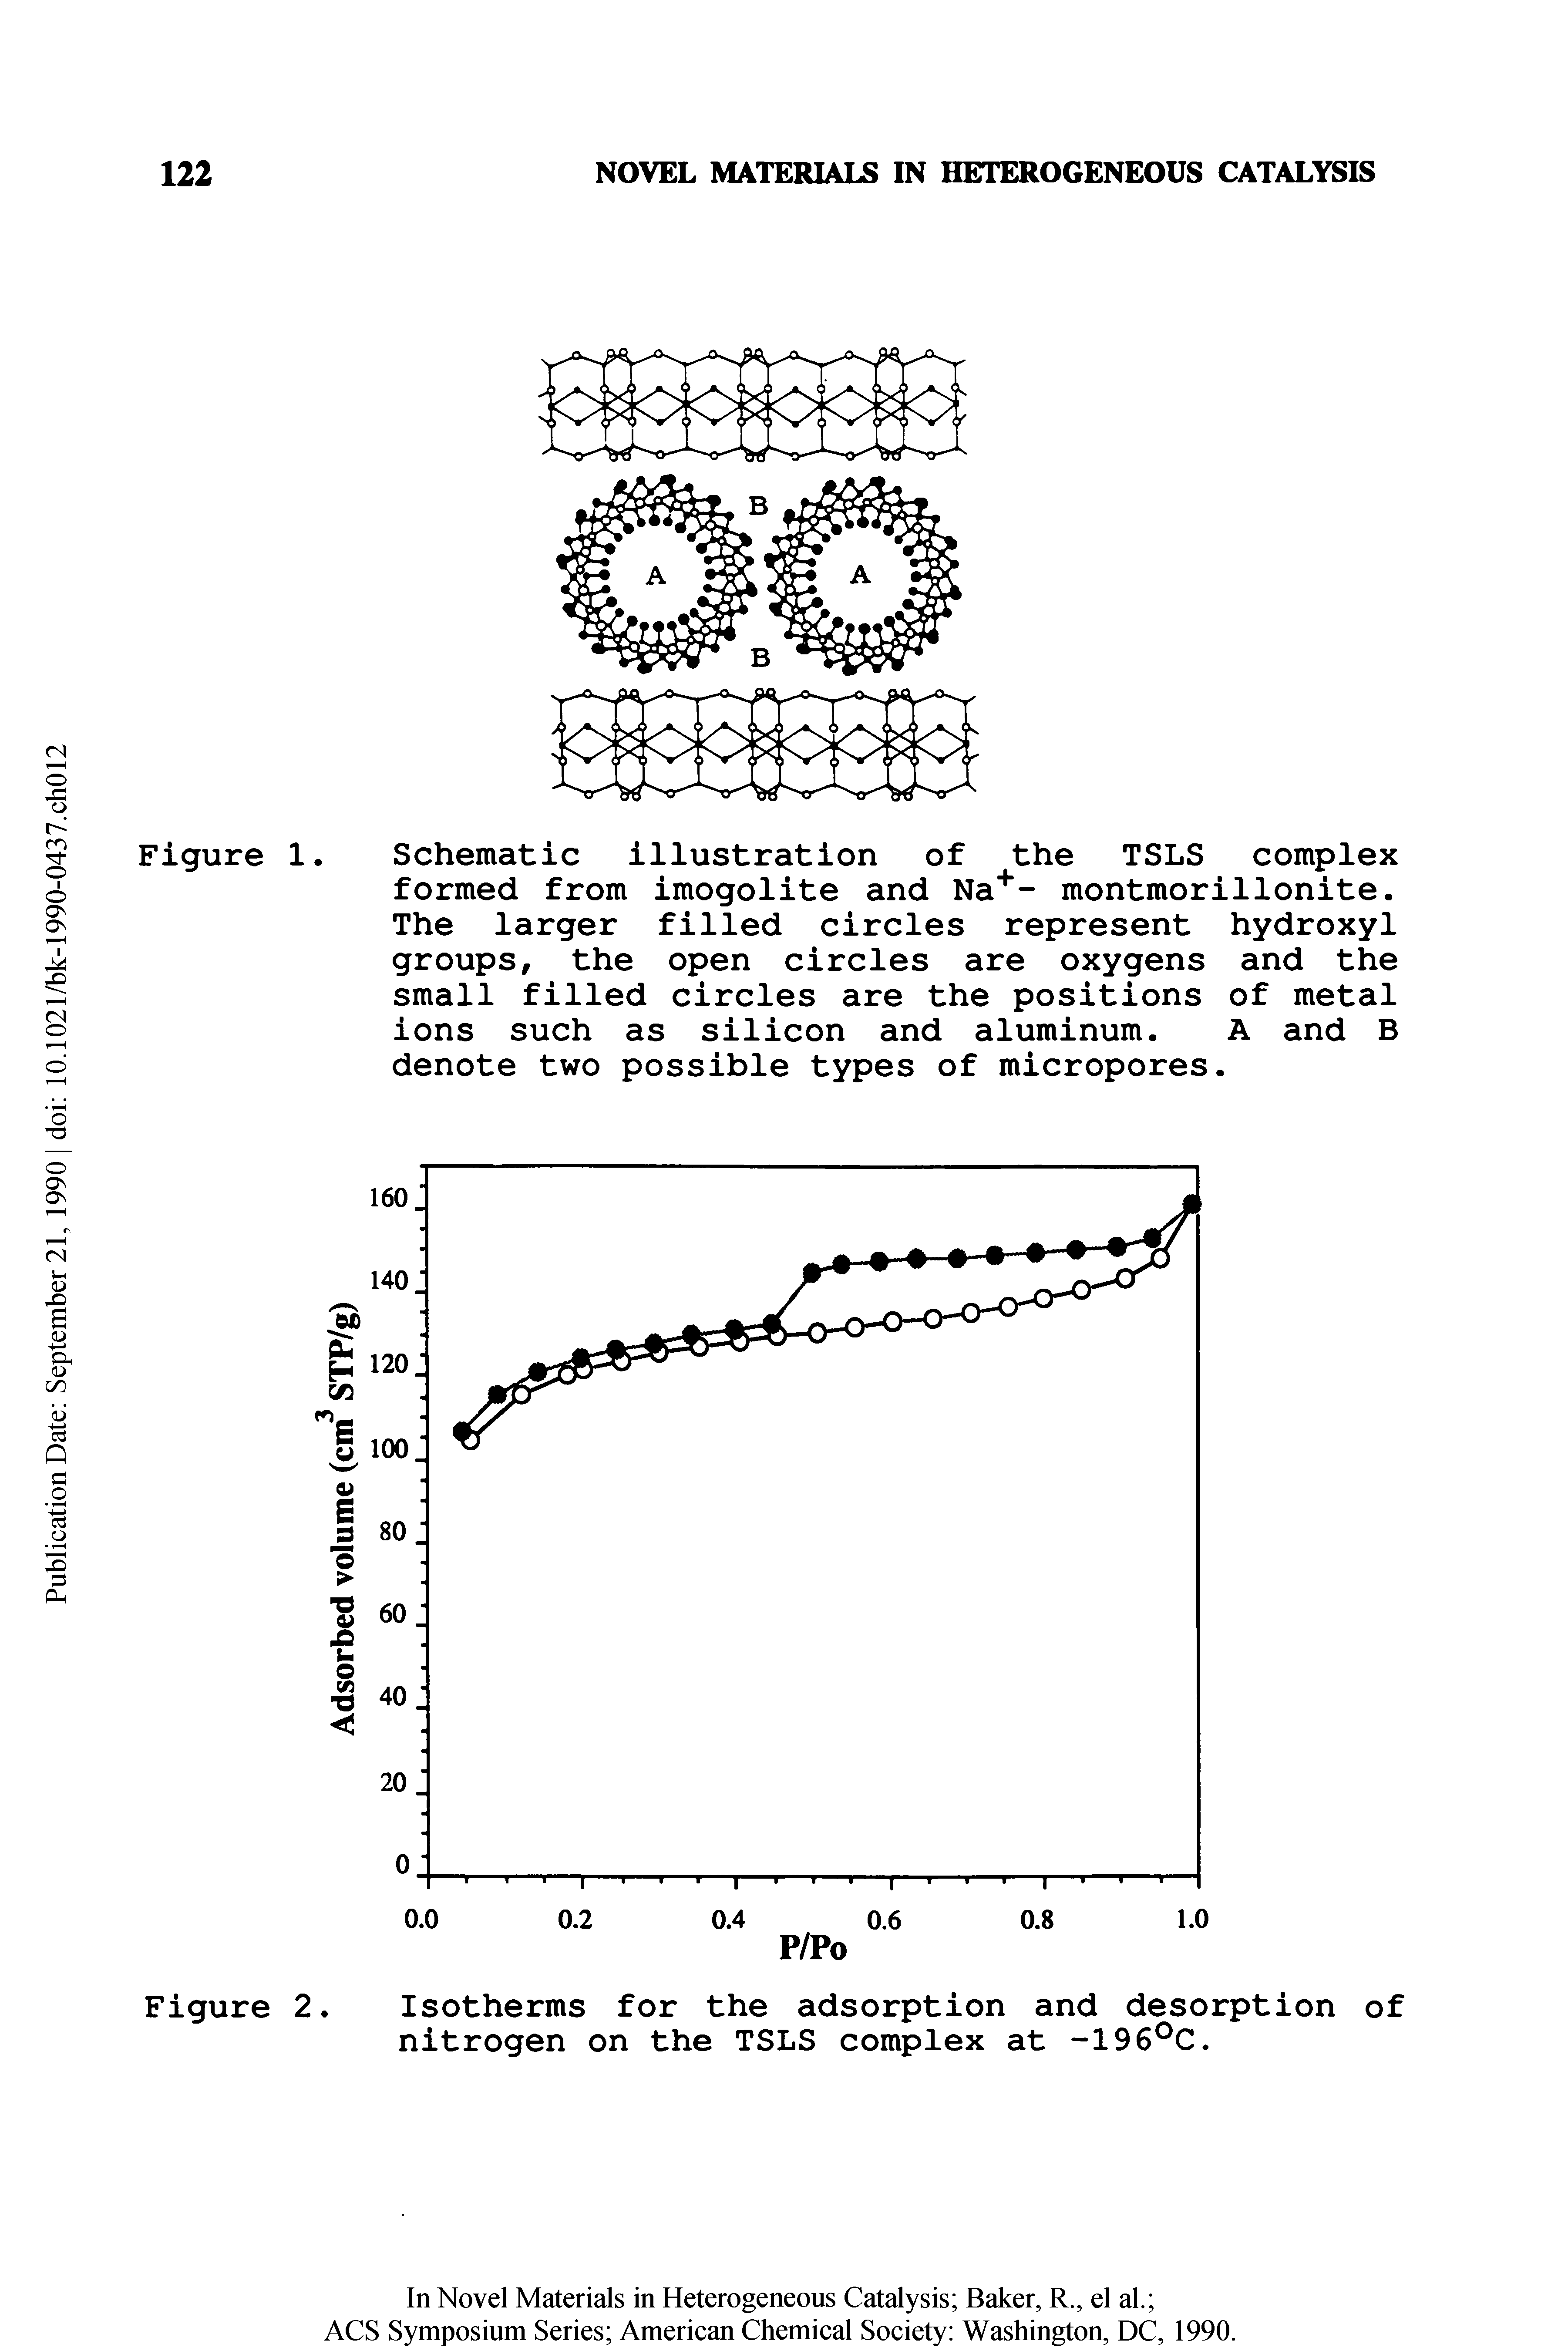 Figure 2. Isotherms for the adsorption and desorption of nitrogen on the TSLS complex at -196 C.